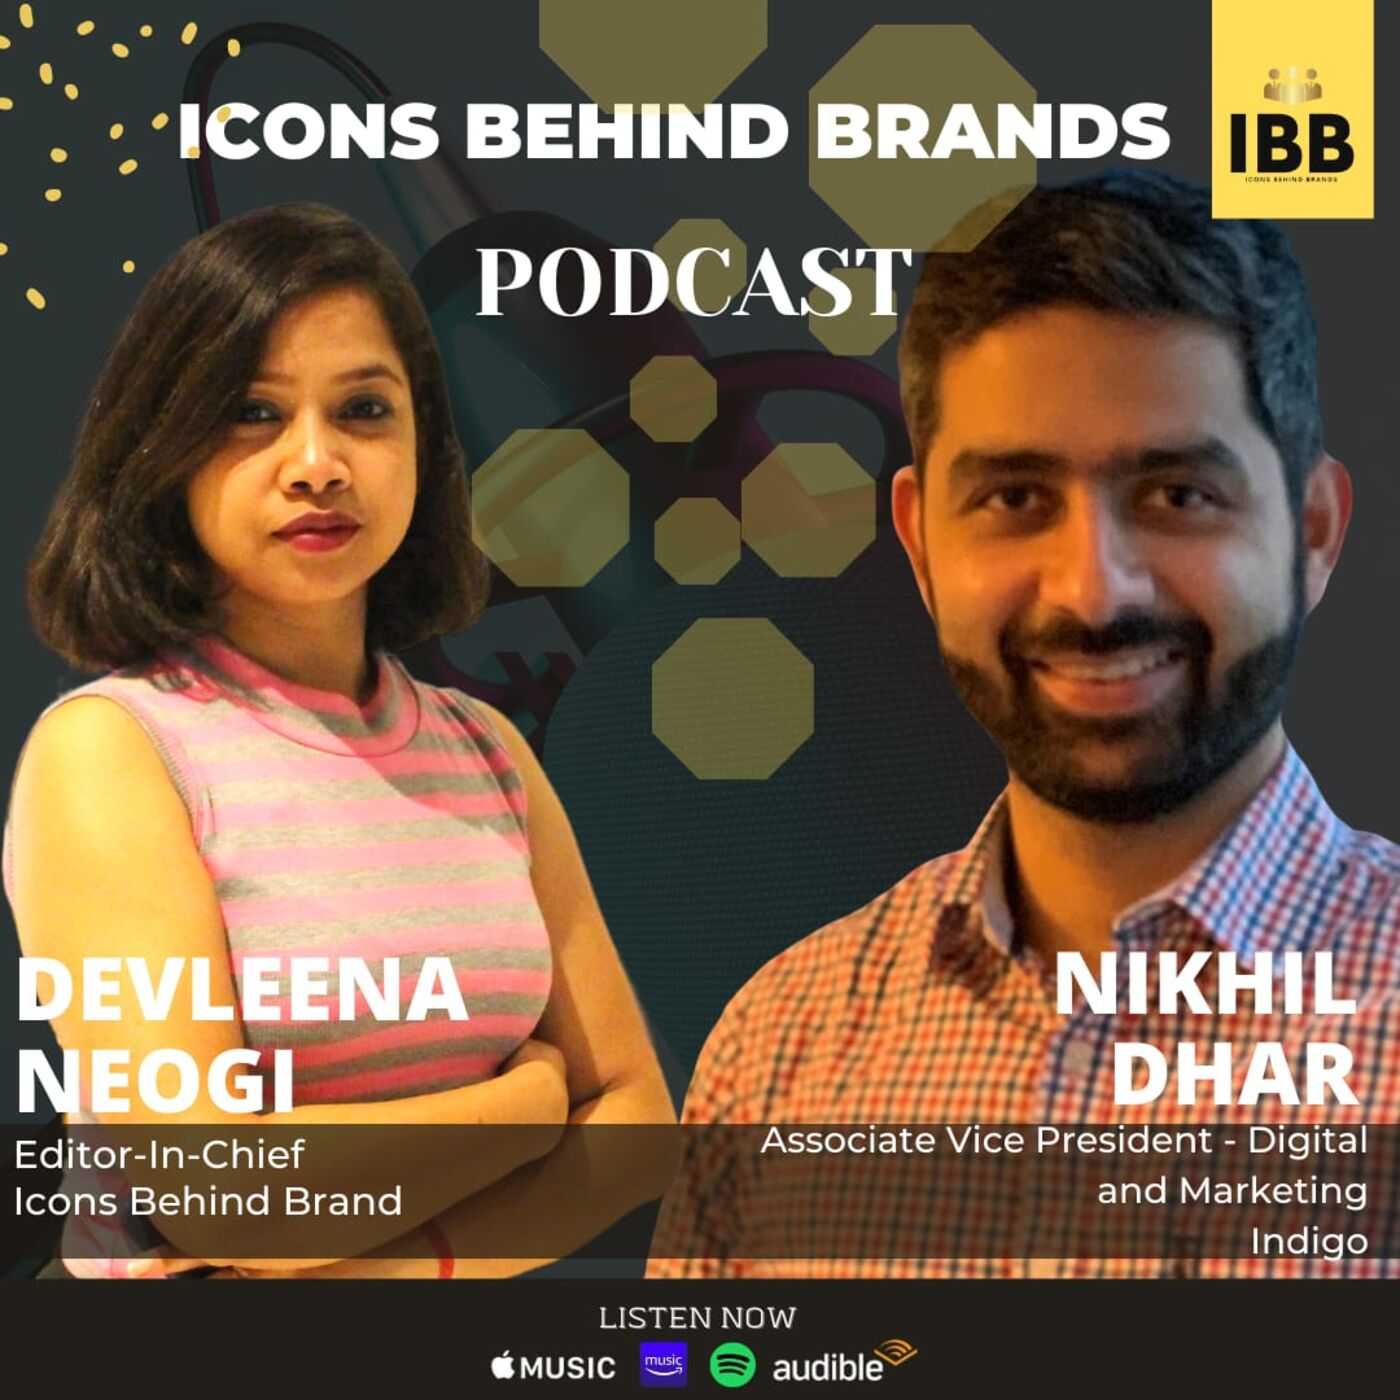 We are here  giving you one more sneak peek👀 into our amazing, upcoming marketing interview of Mr. Nikhil Dhar, Associate Vice President – Digital and Marketing – Indigo.